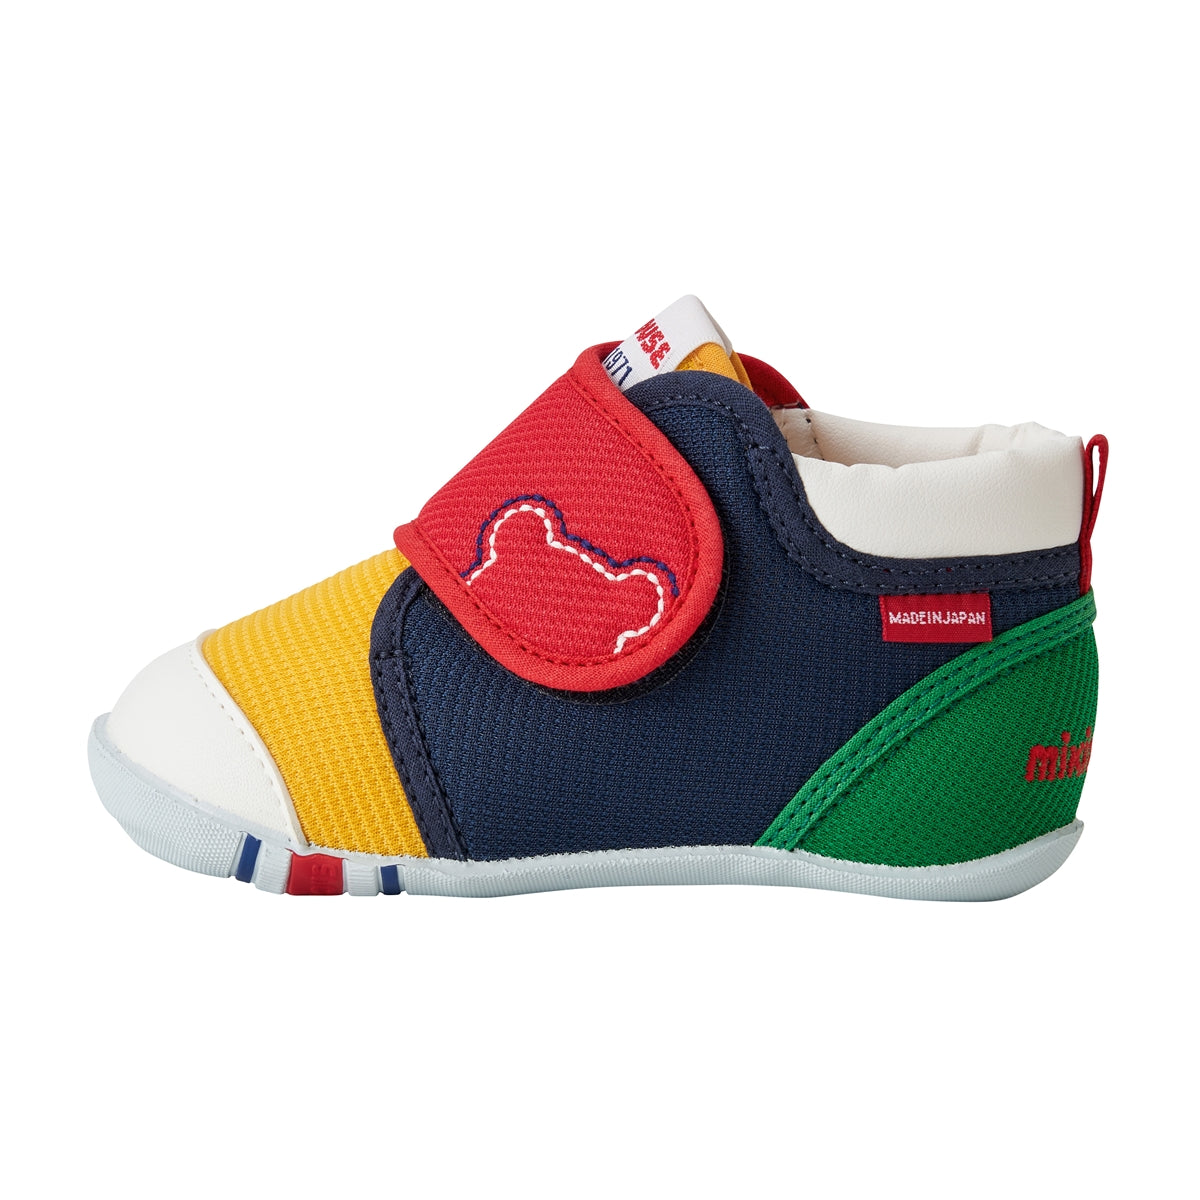 My First Walker shoes -Colorblock